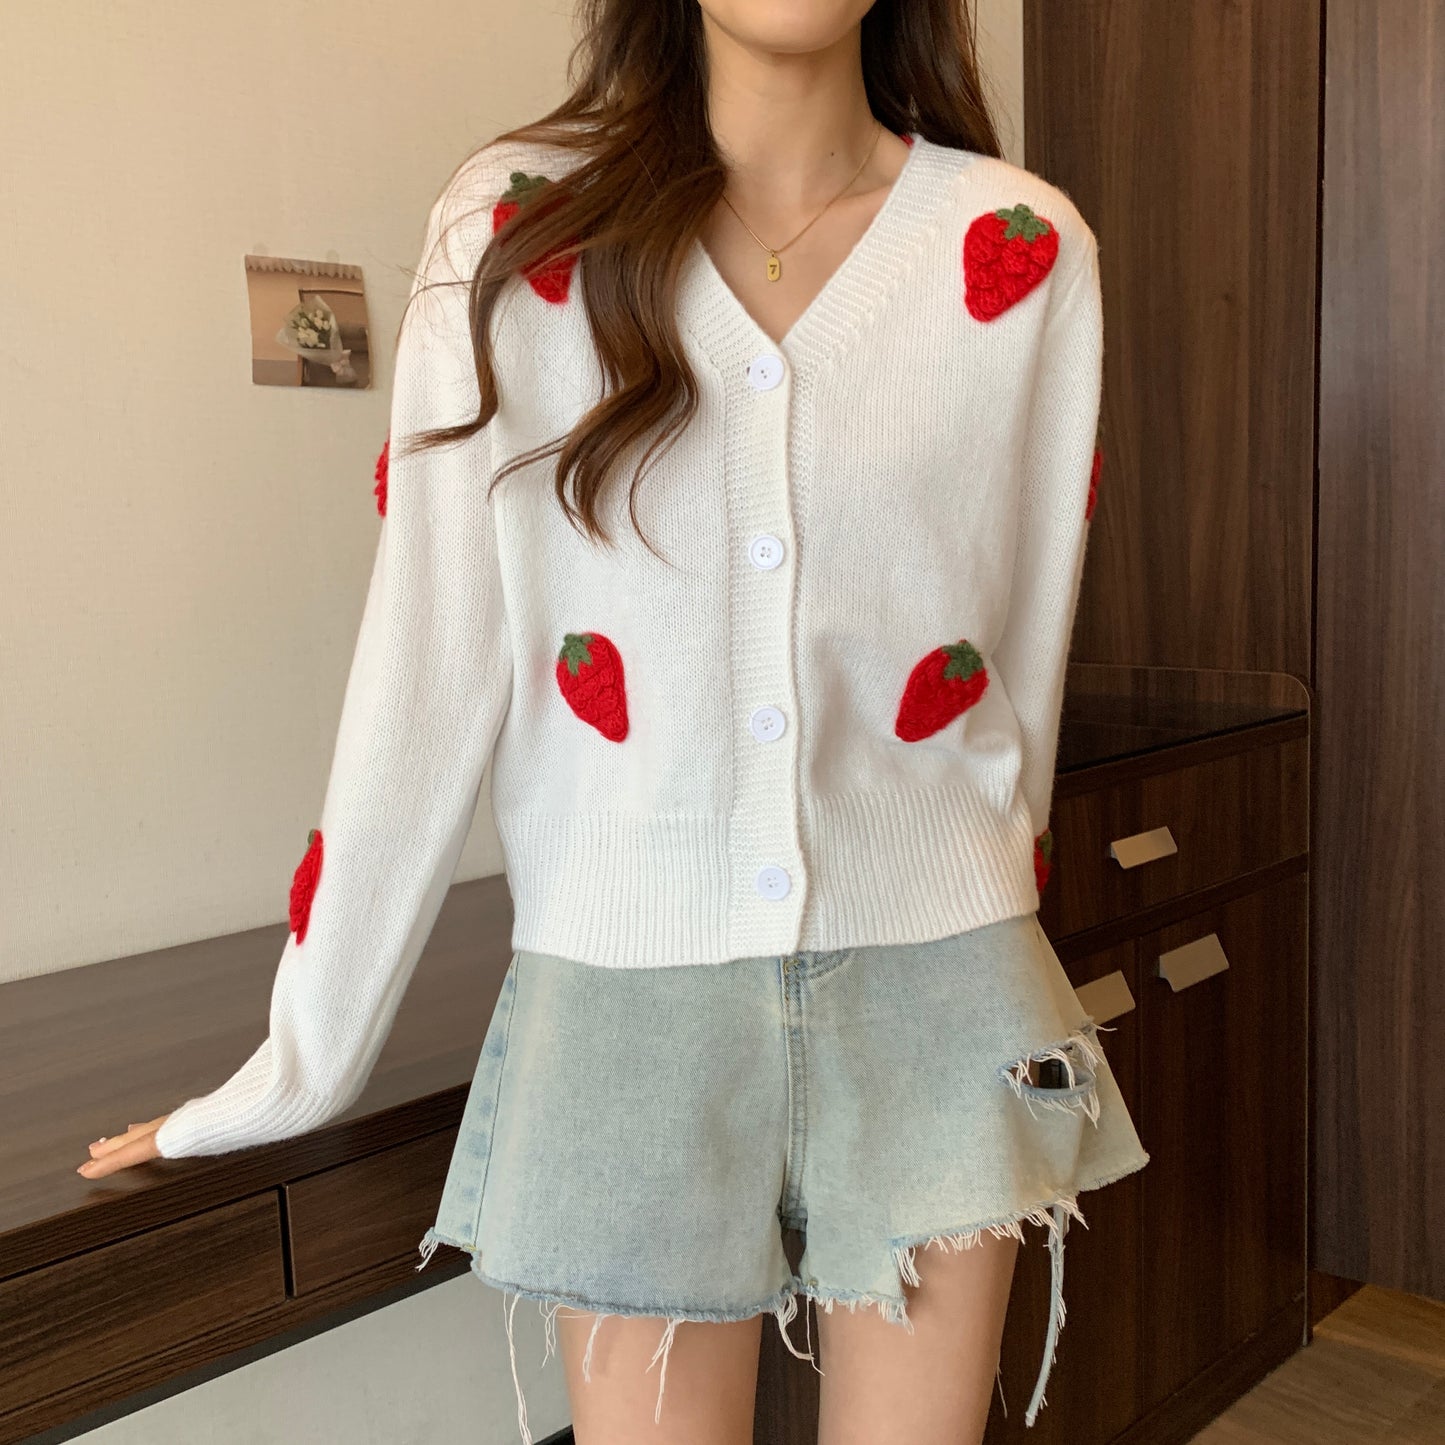 Women's V-Neck Knit Floral Pattern Cardigan Strawberries Embroidery Long Sleeve Sweater Tops, Women Button Down Sweater Knit Cardigan XS-XXL